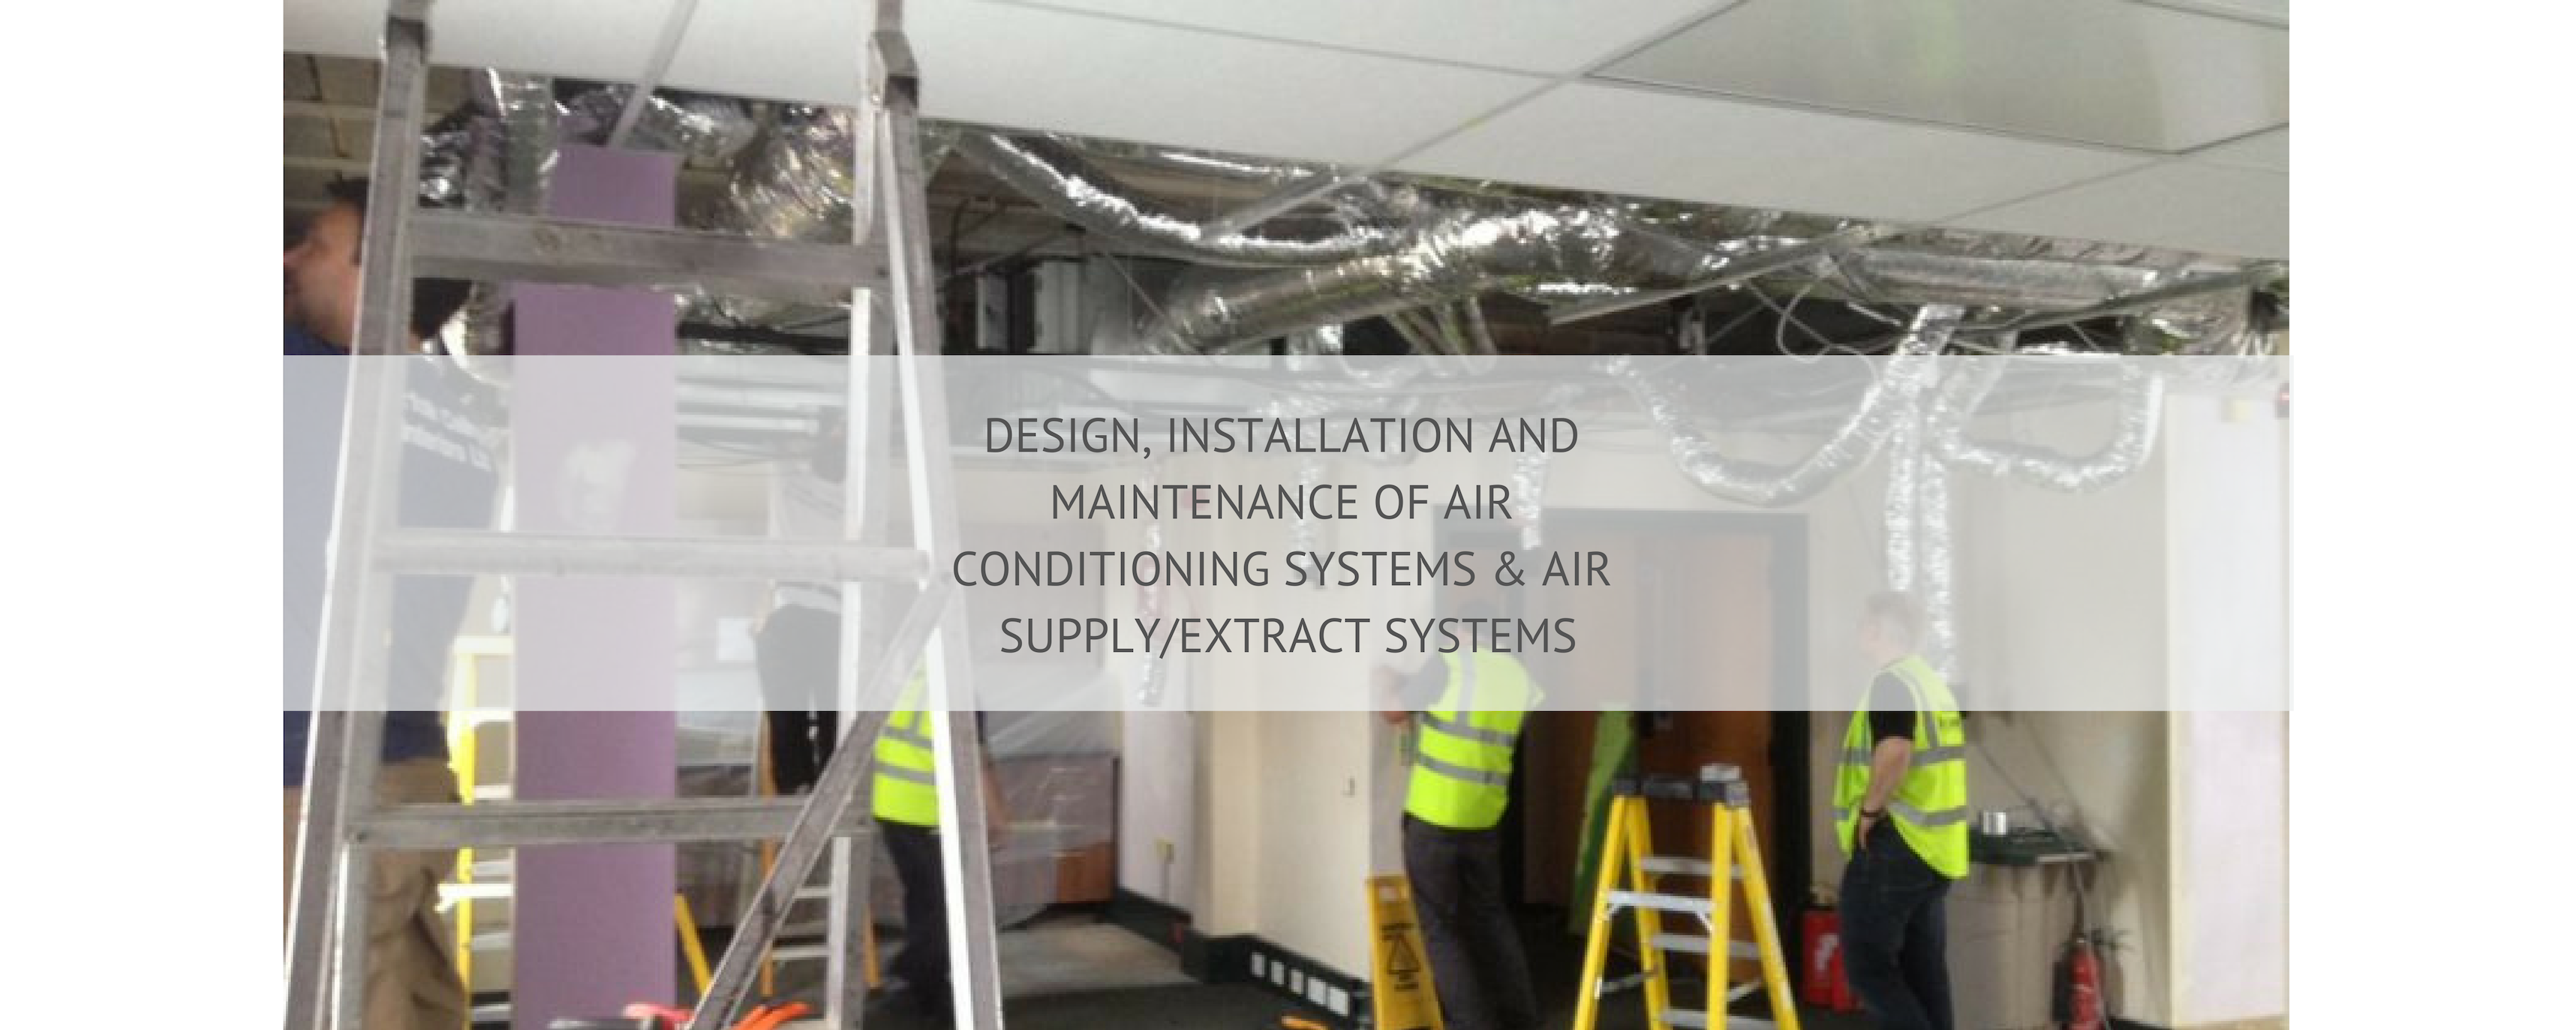 Design, Installation and Maintenance of Air Conditioning Systems & Air Supply/Extract Systems